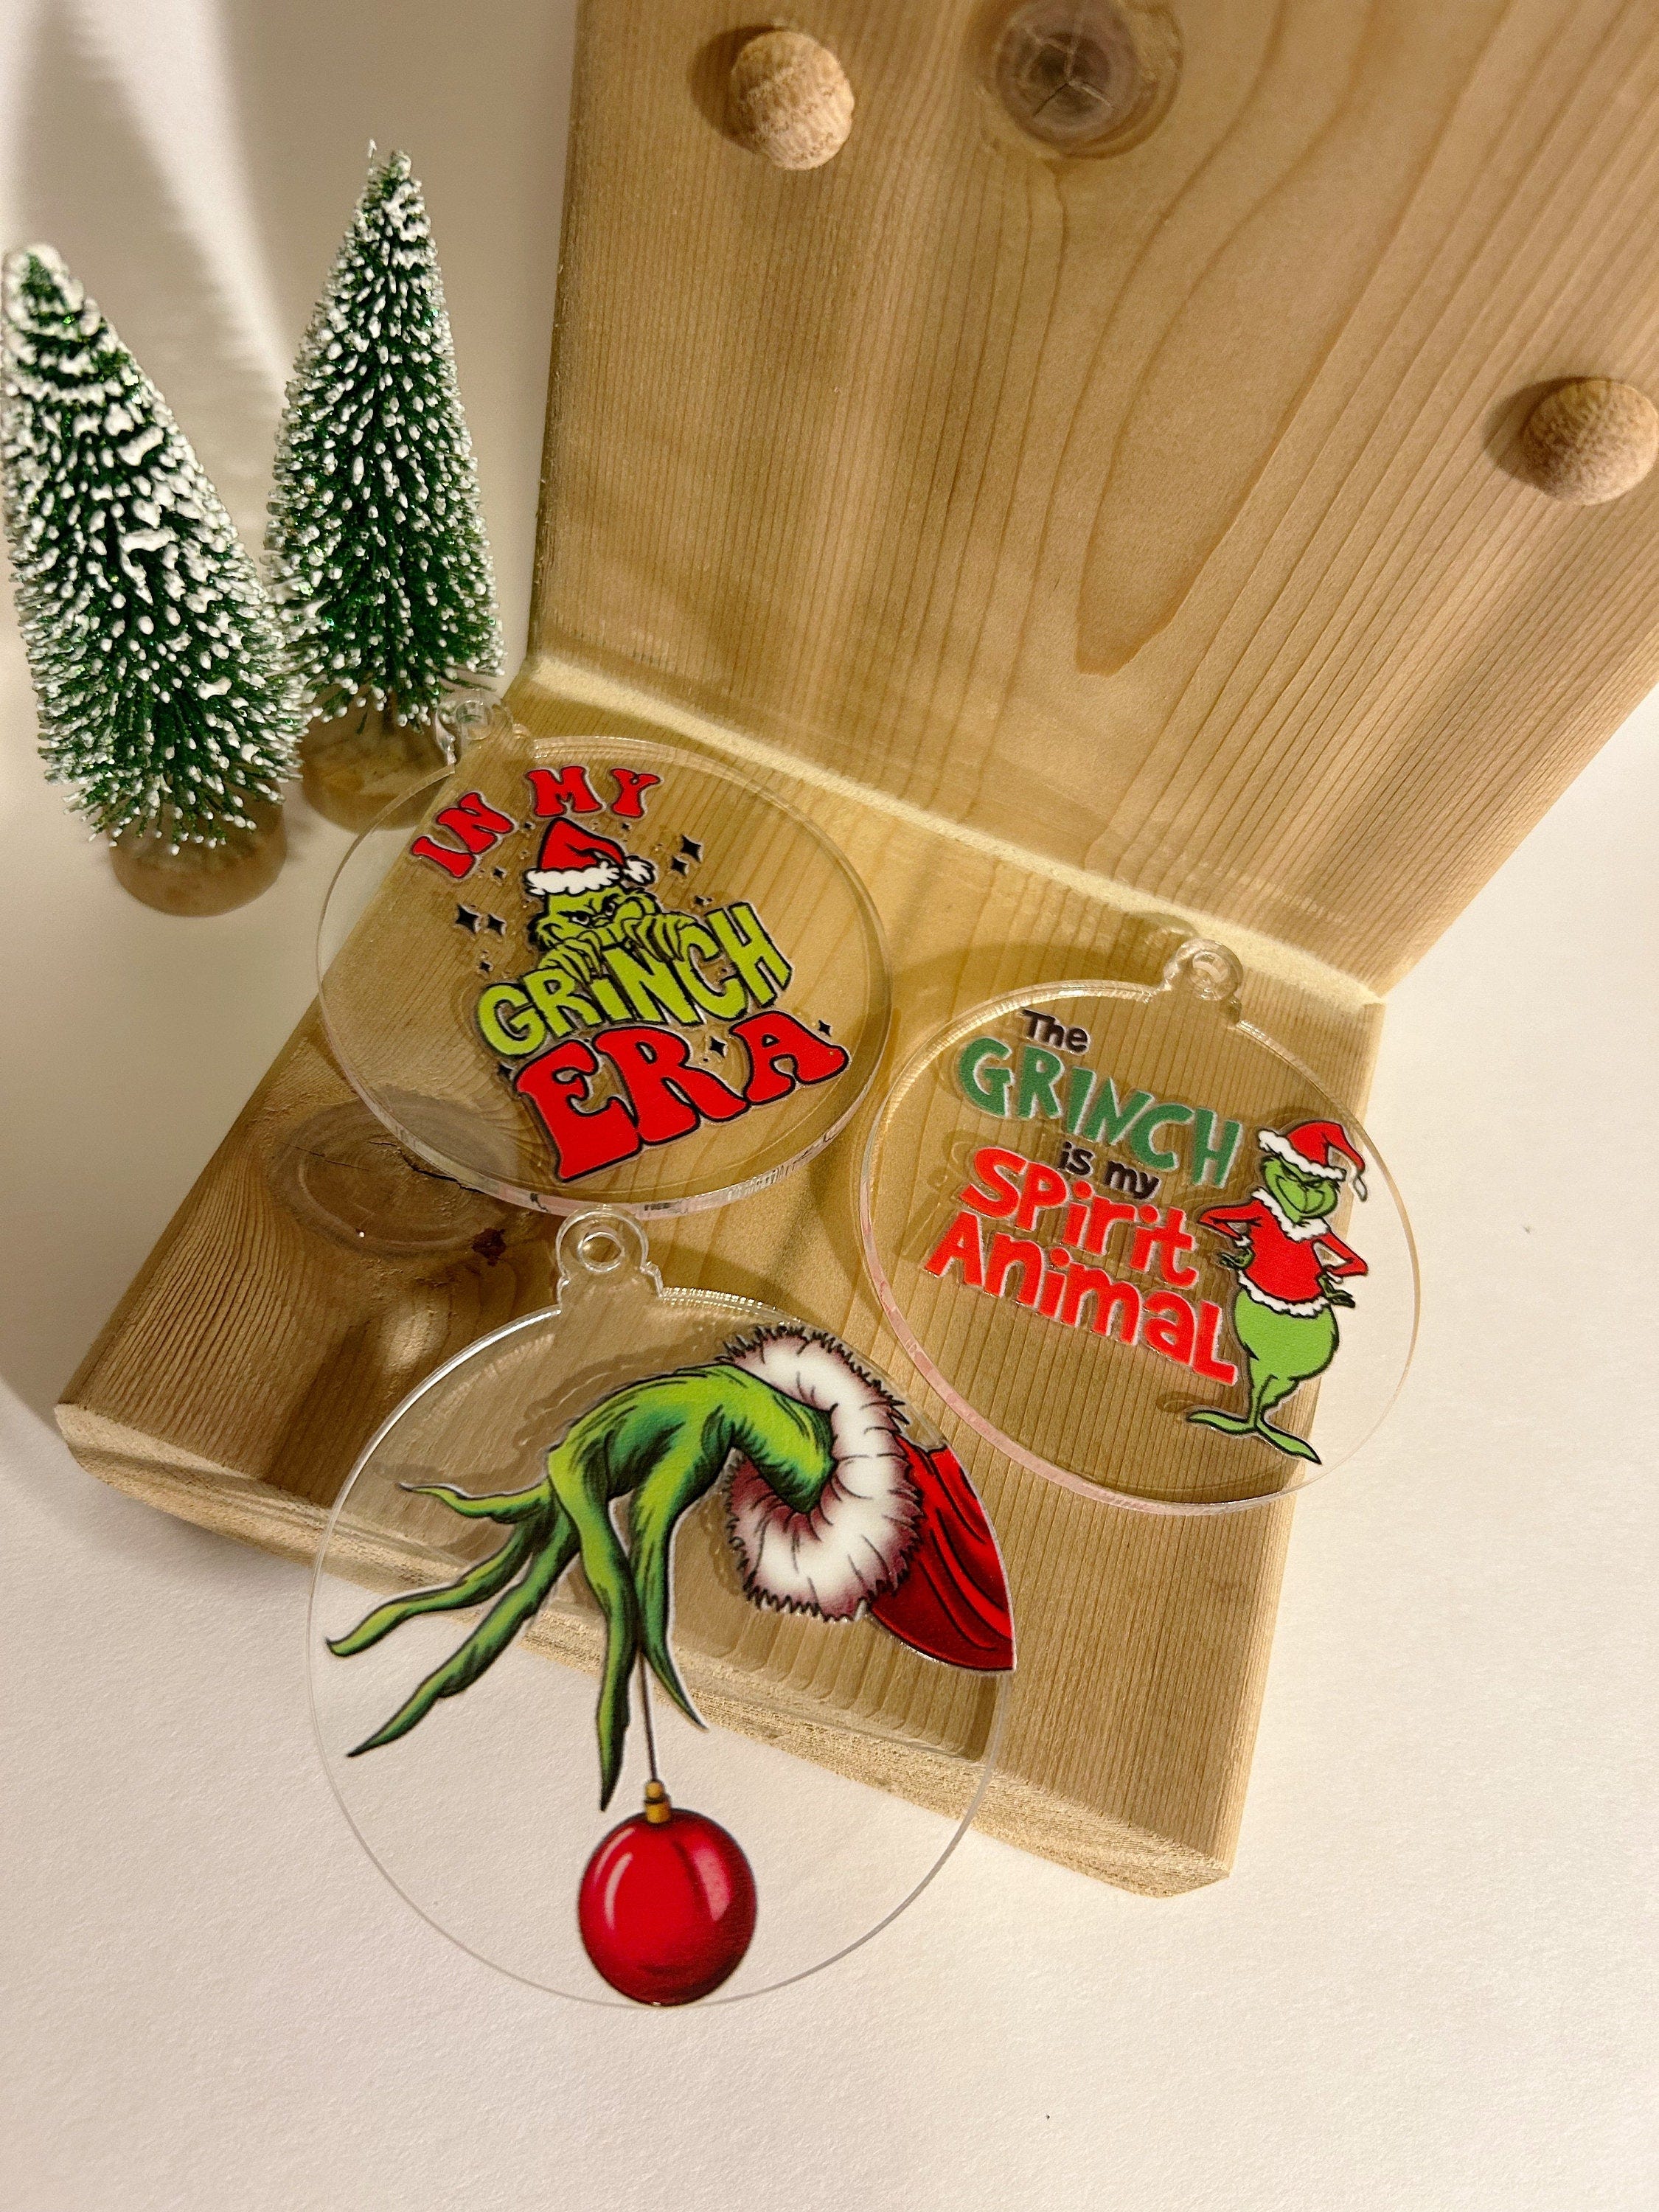 christmas ornaments | ornaments | grinch | grinch ornament | aesthetic | christmas gift | teacher gift | co worker | grinchmas